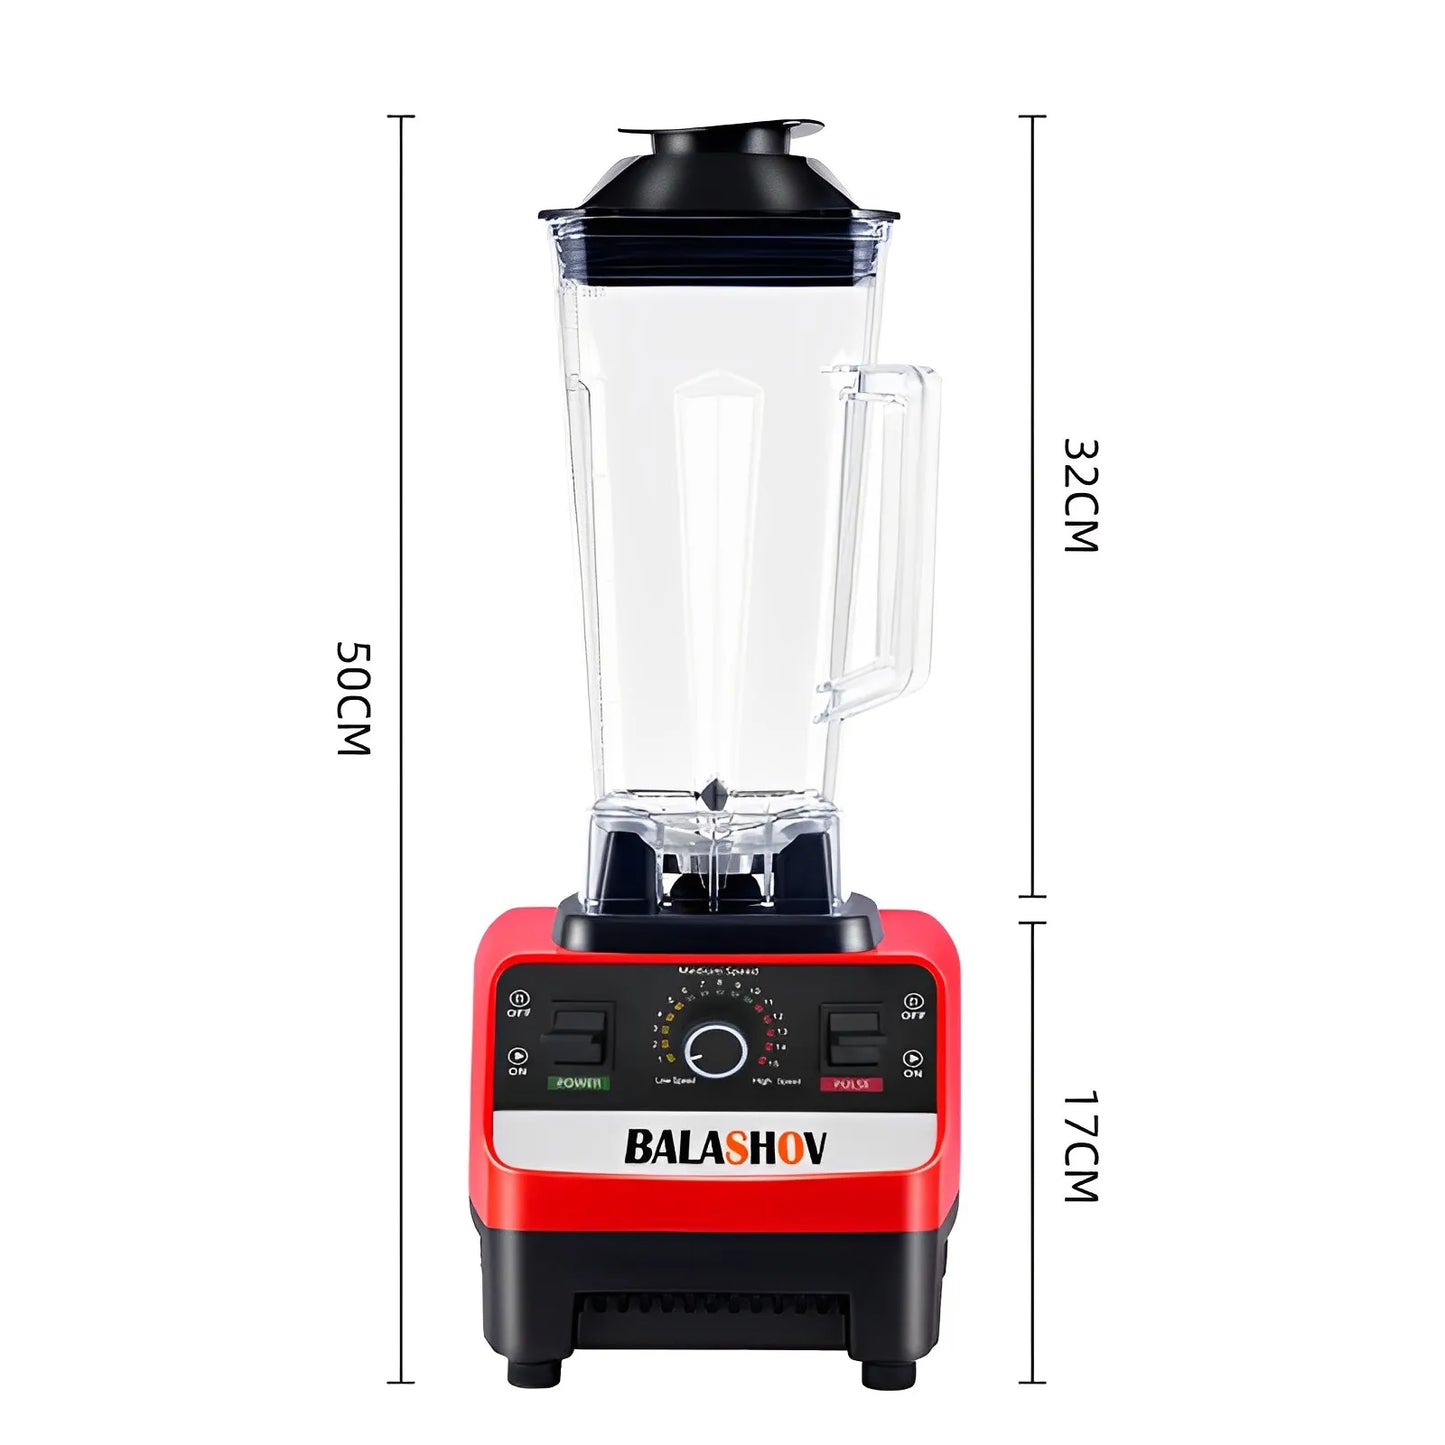 2000W Stationary Blender Heavy Duty Commercial Mixer Ice Smoothies Appliances for Kitchen Professional High Power Food Processor